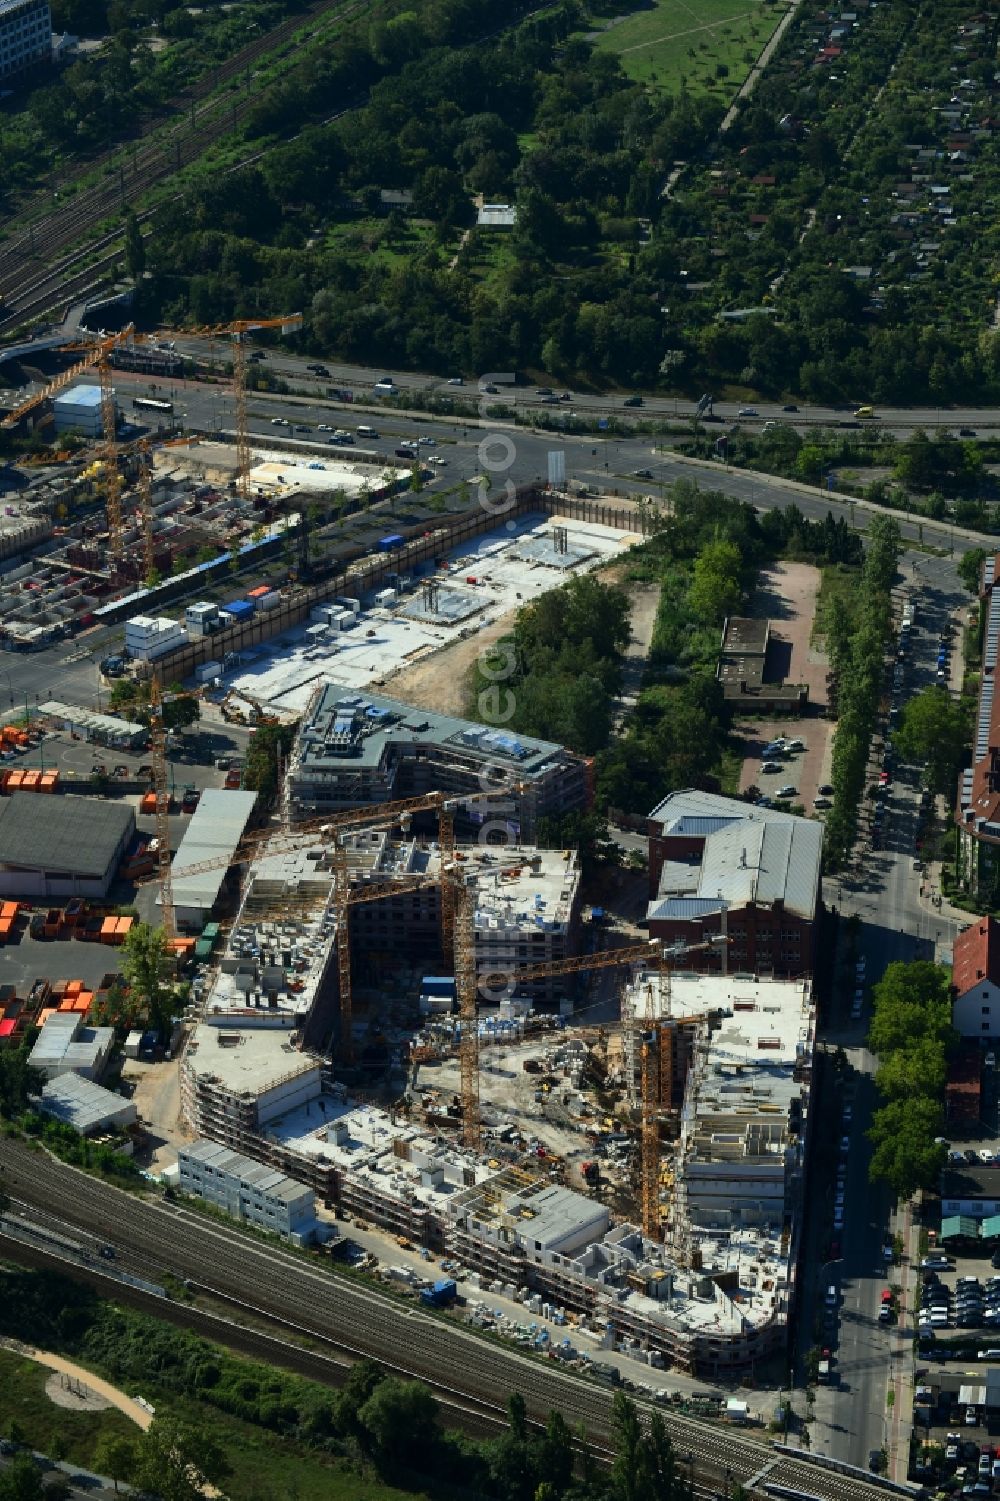 Aerial image Berlin - Construction site to build a new multi-family residential complex Stadtquartier Suedkreuz on Gotenstrasse - Tempelhofer Weg in the district Schoeneberg in Berlin, Germany